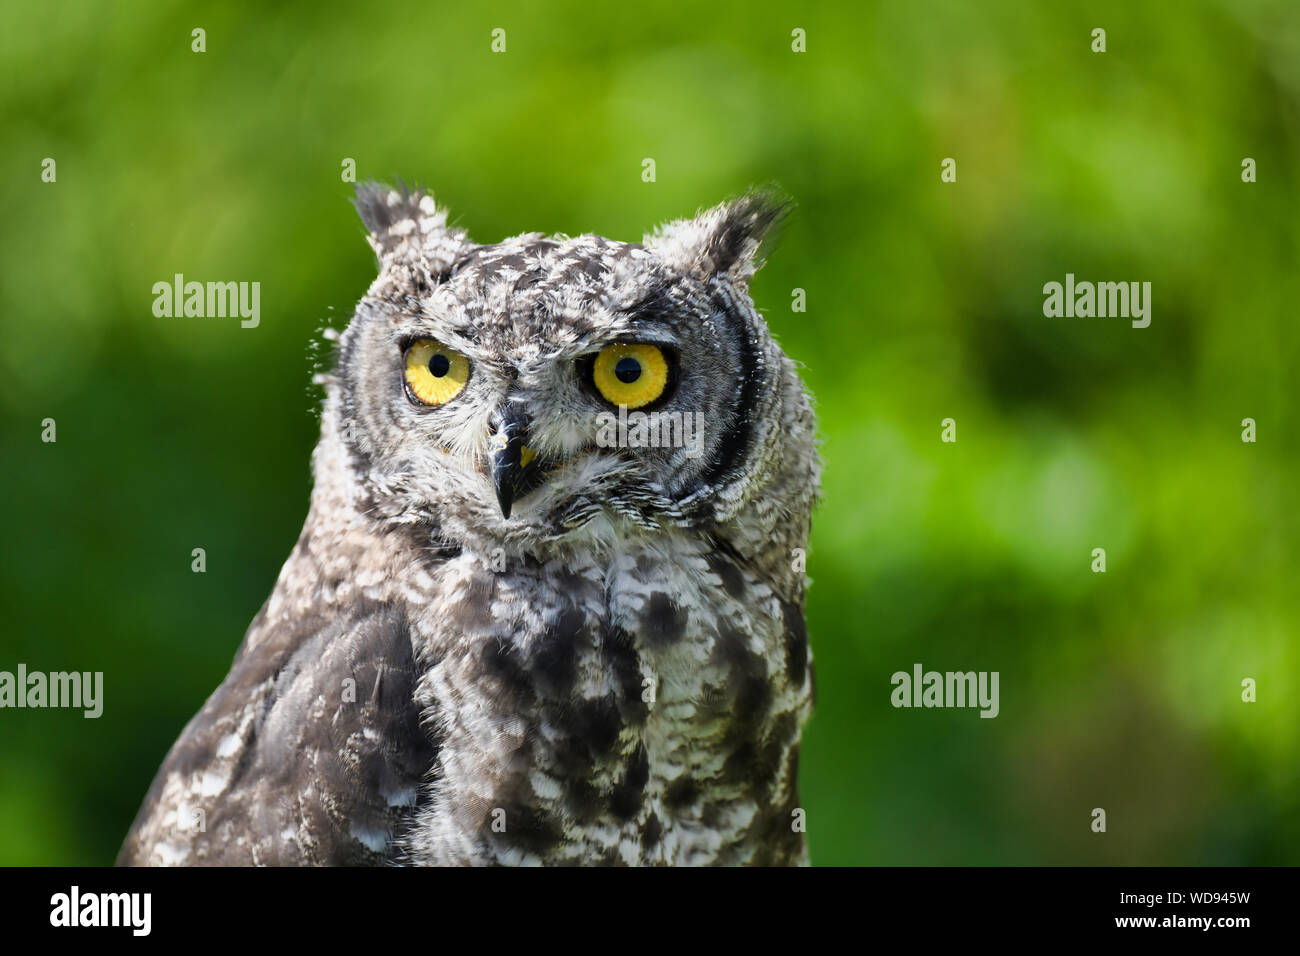 Cute African eagle owl on green background. Stock Photo